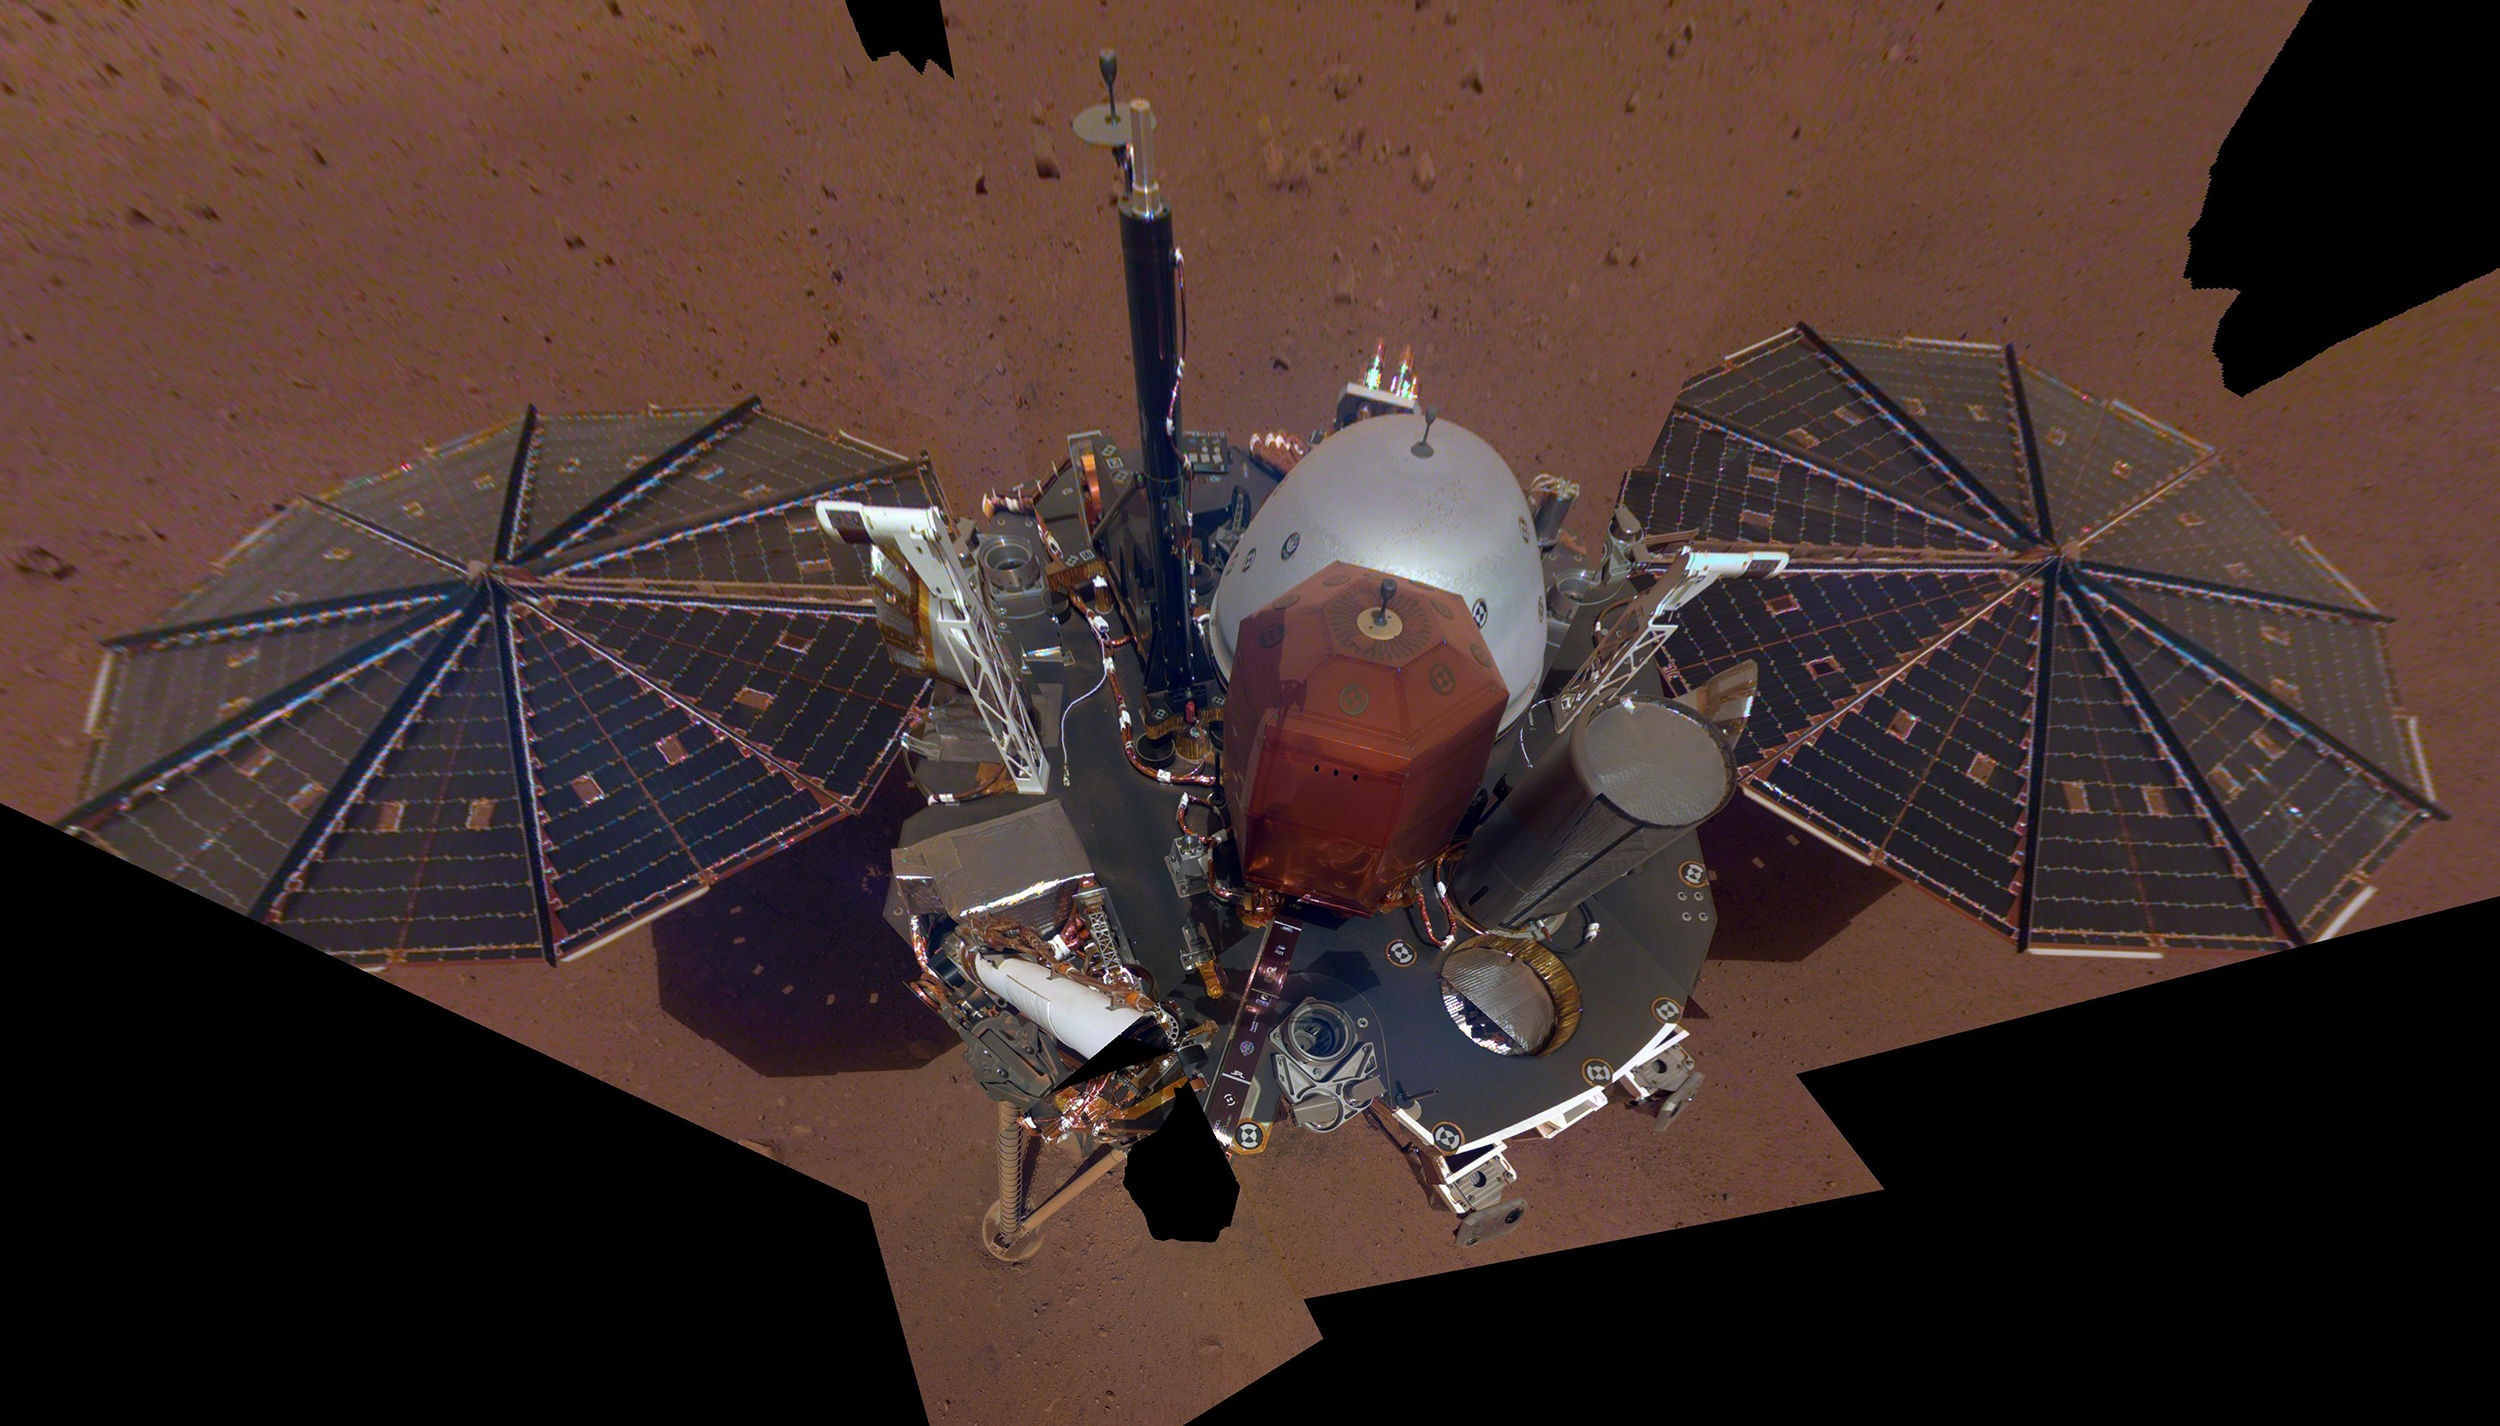 A “selfie” of the Mars InSight lander, using 11 images taken by a camera mounted on a mobile robotic arm. Credit: NASA/JPL-Caltech 